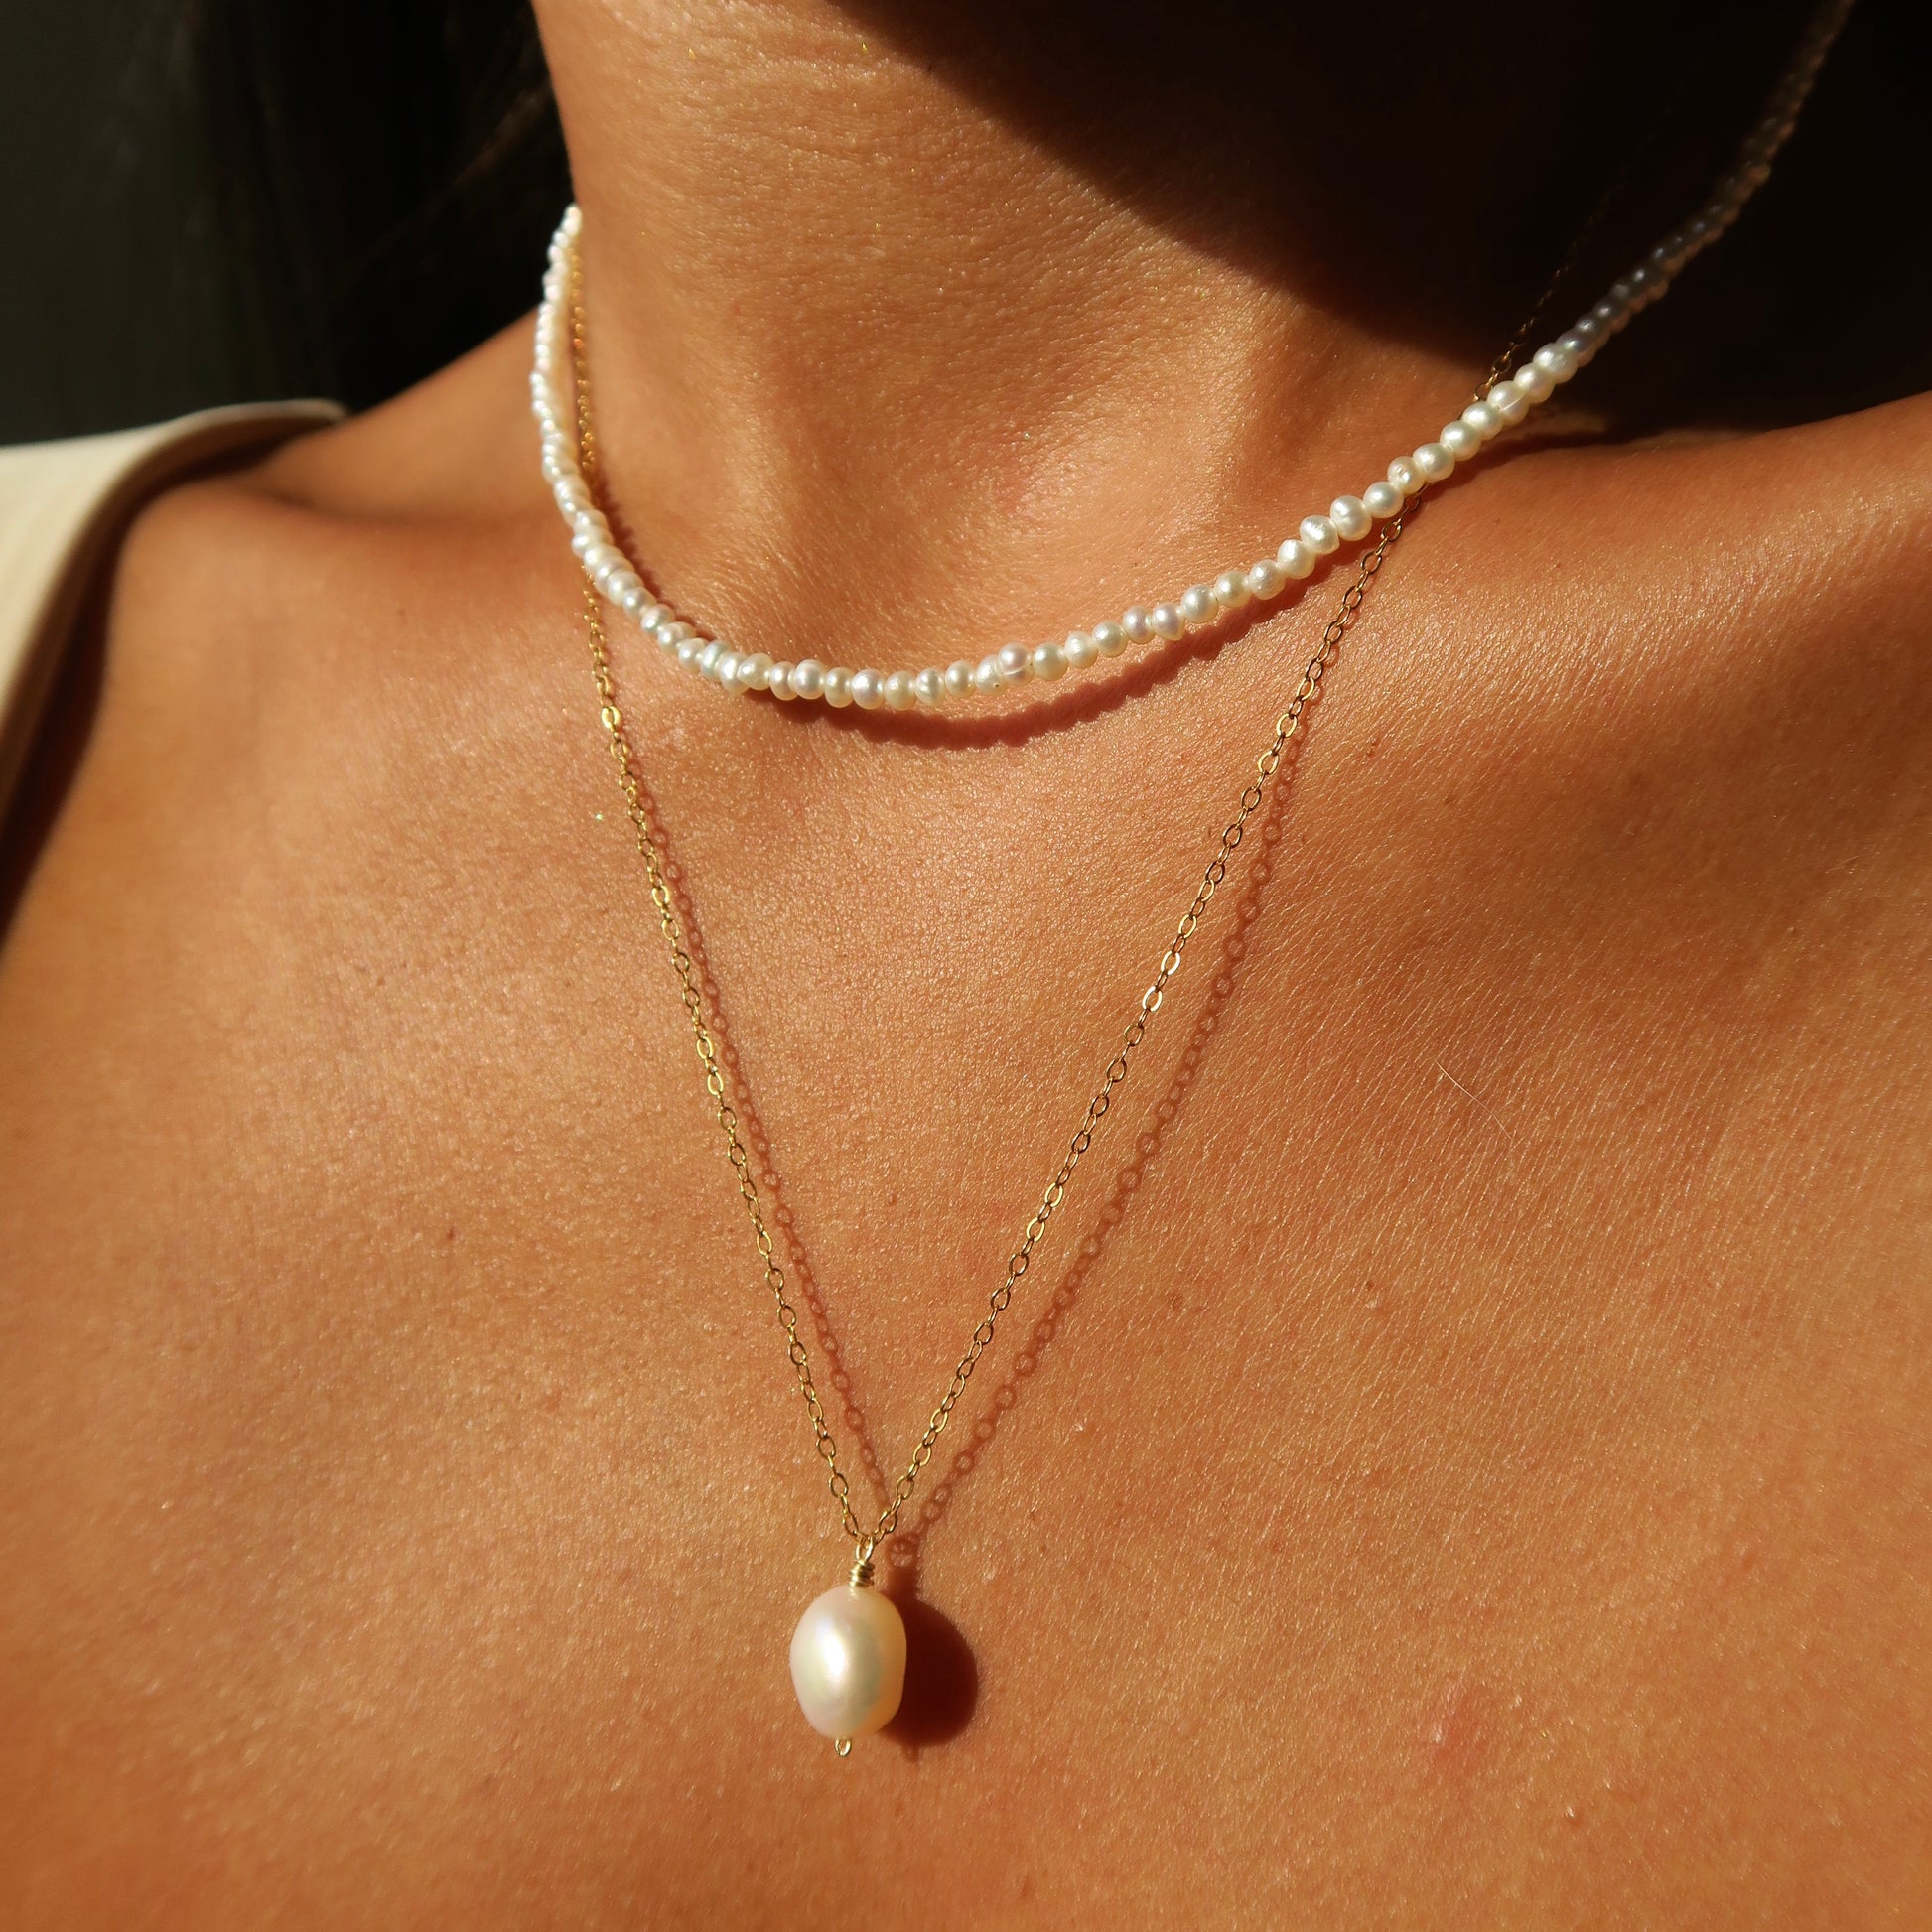 Single large white 10mm freshwater pearl on delicate 14k gold filled chain